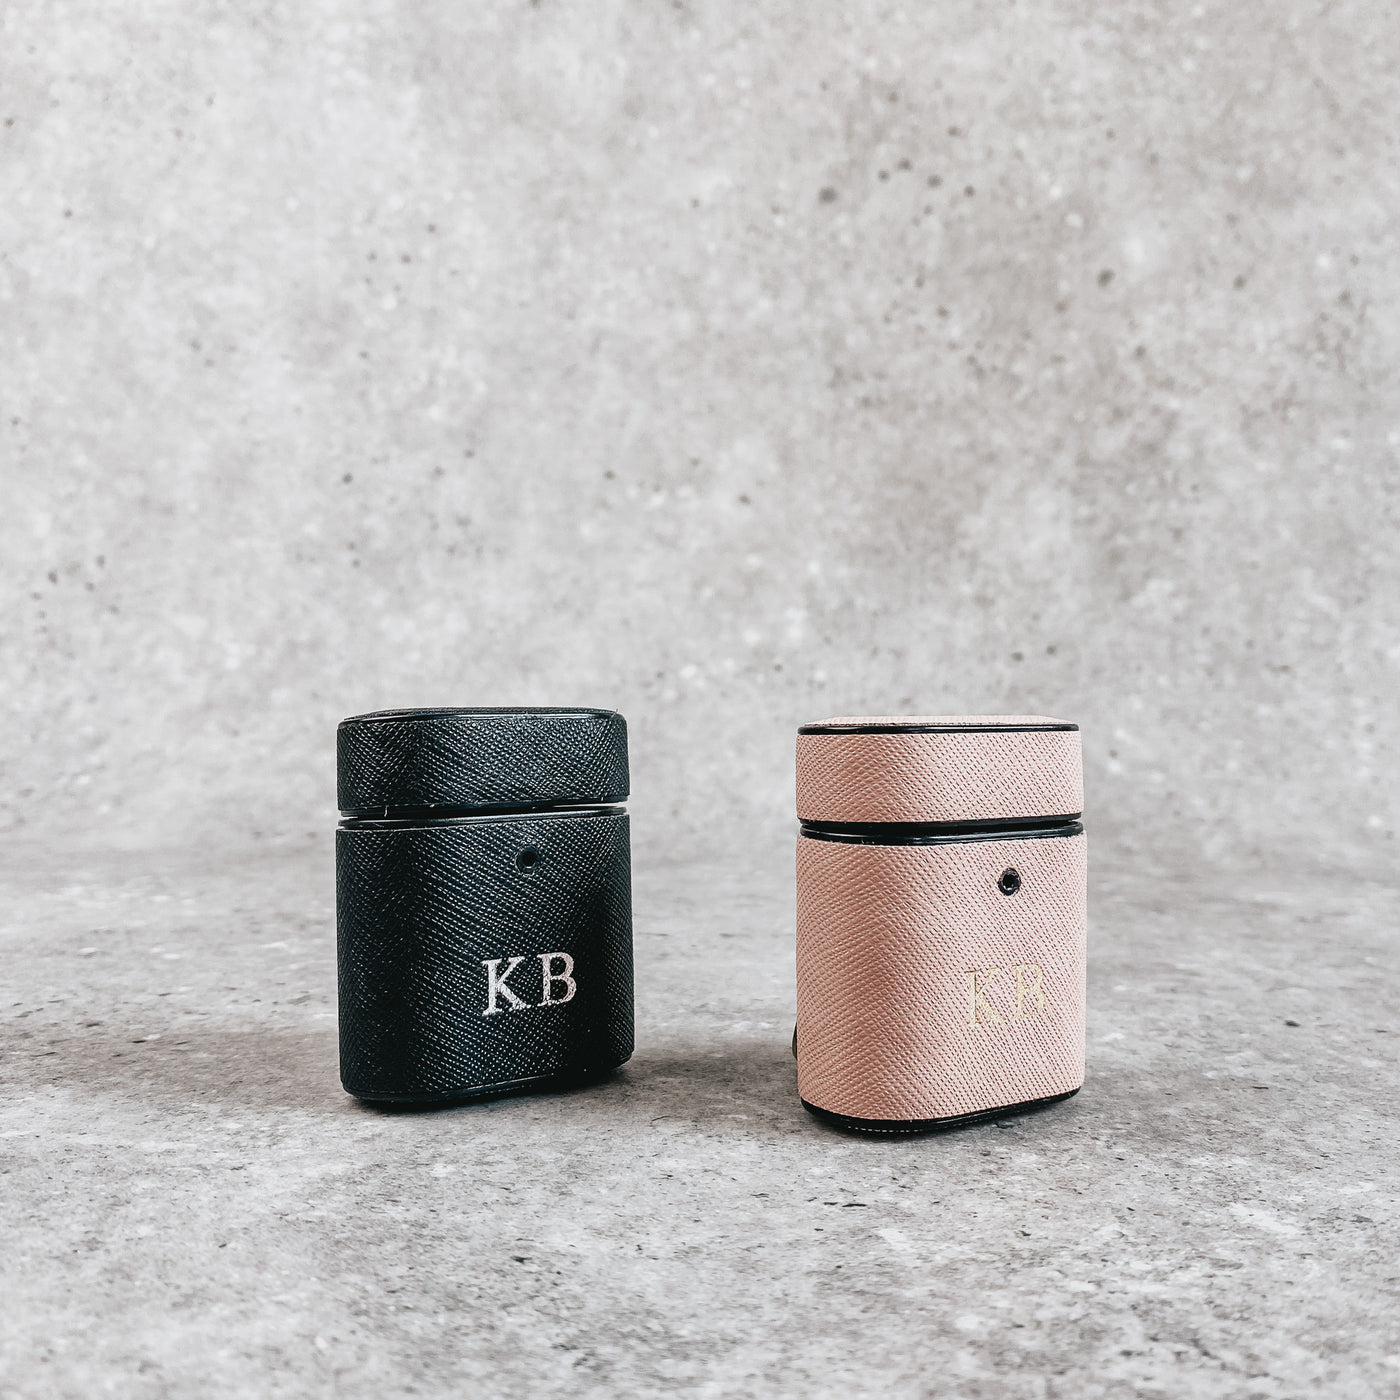 Pink AirPod holder, embossed with gold initials and Black AirPod holder, embossed with silver initials